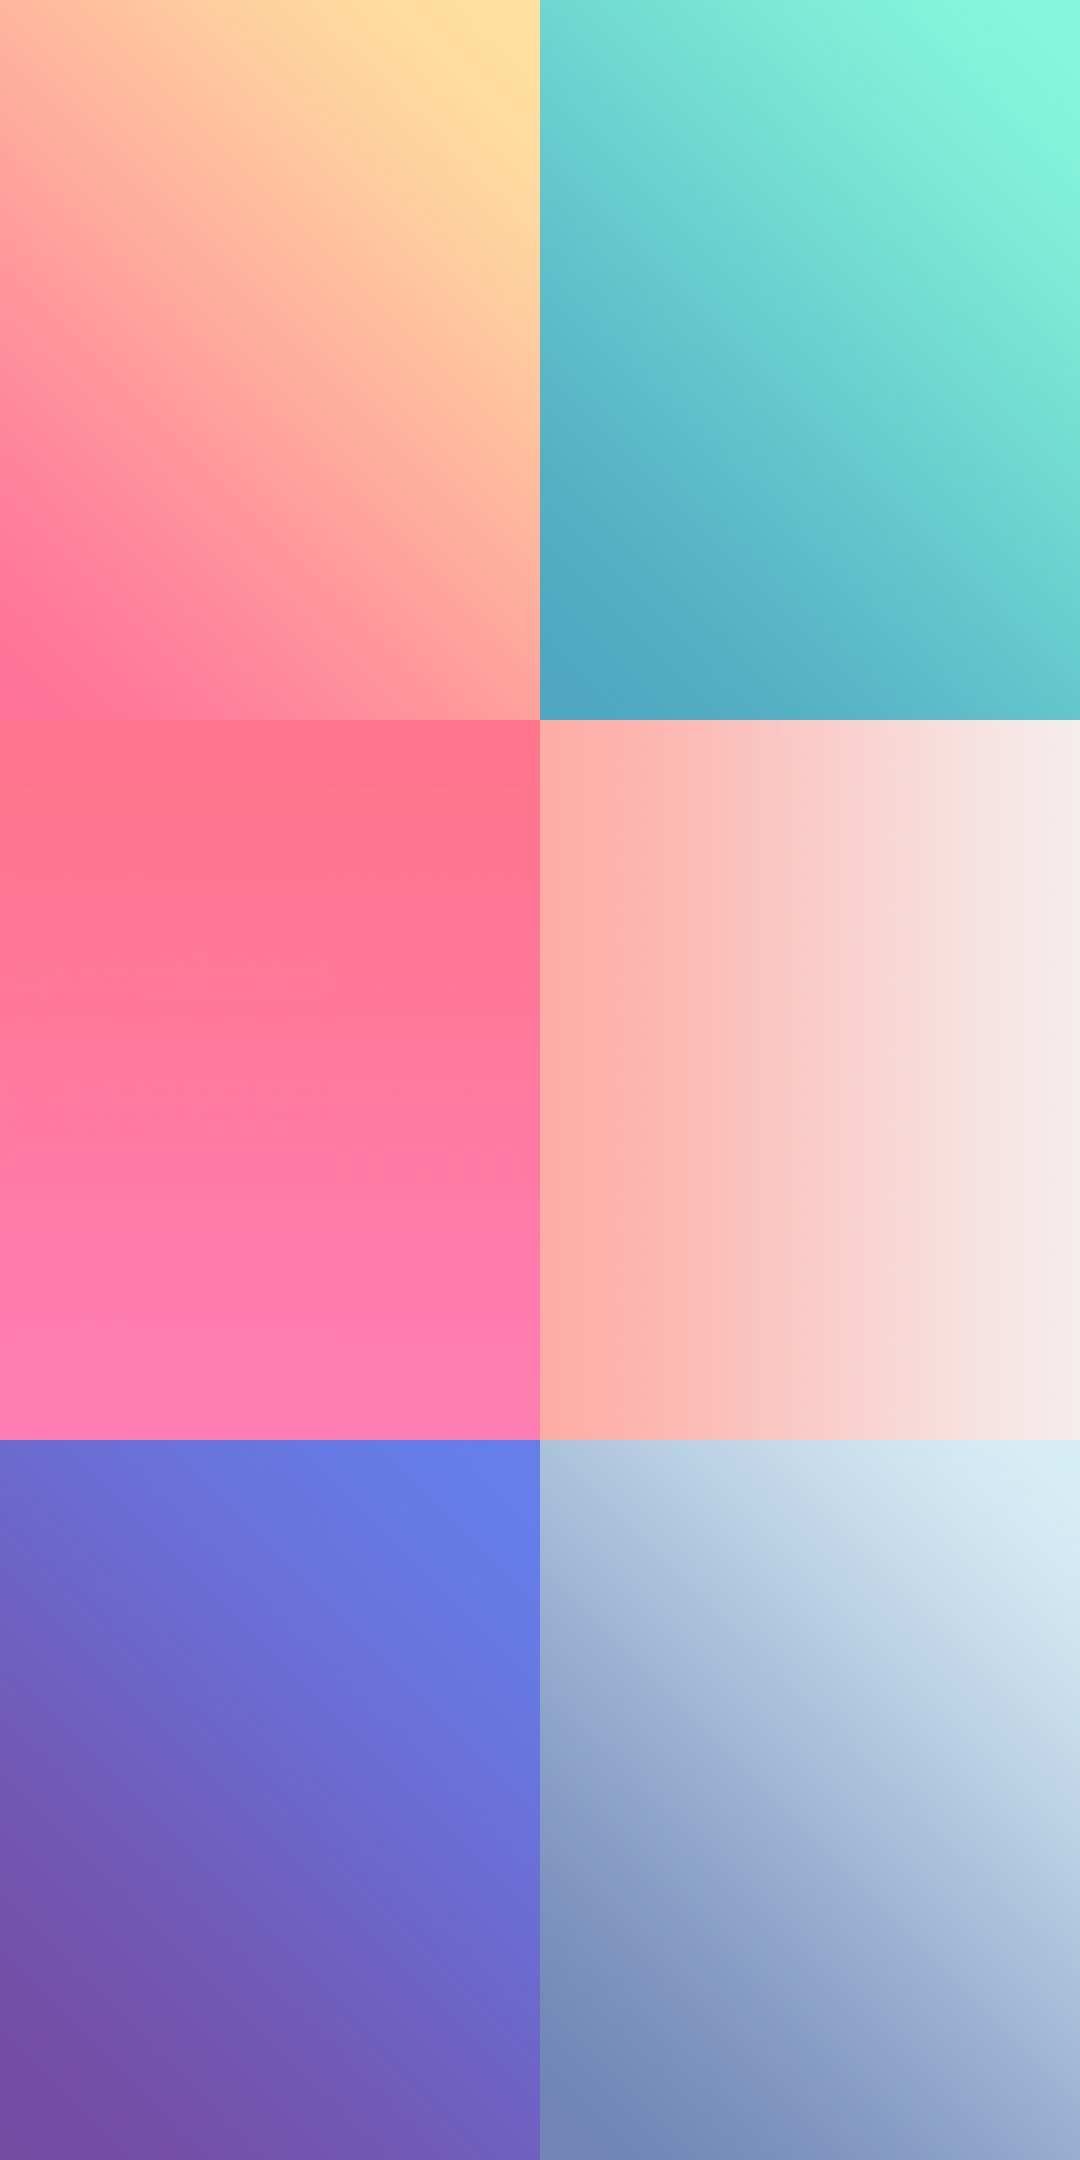 Gradient, squares, abstract, 1080x2160 wallpaper